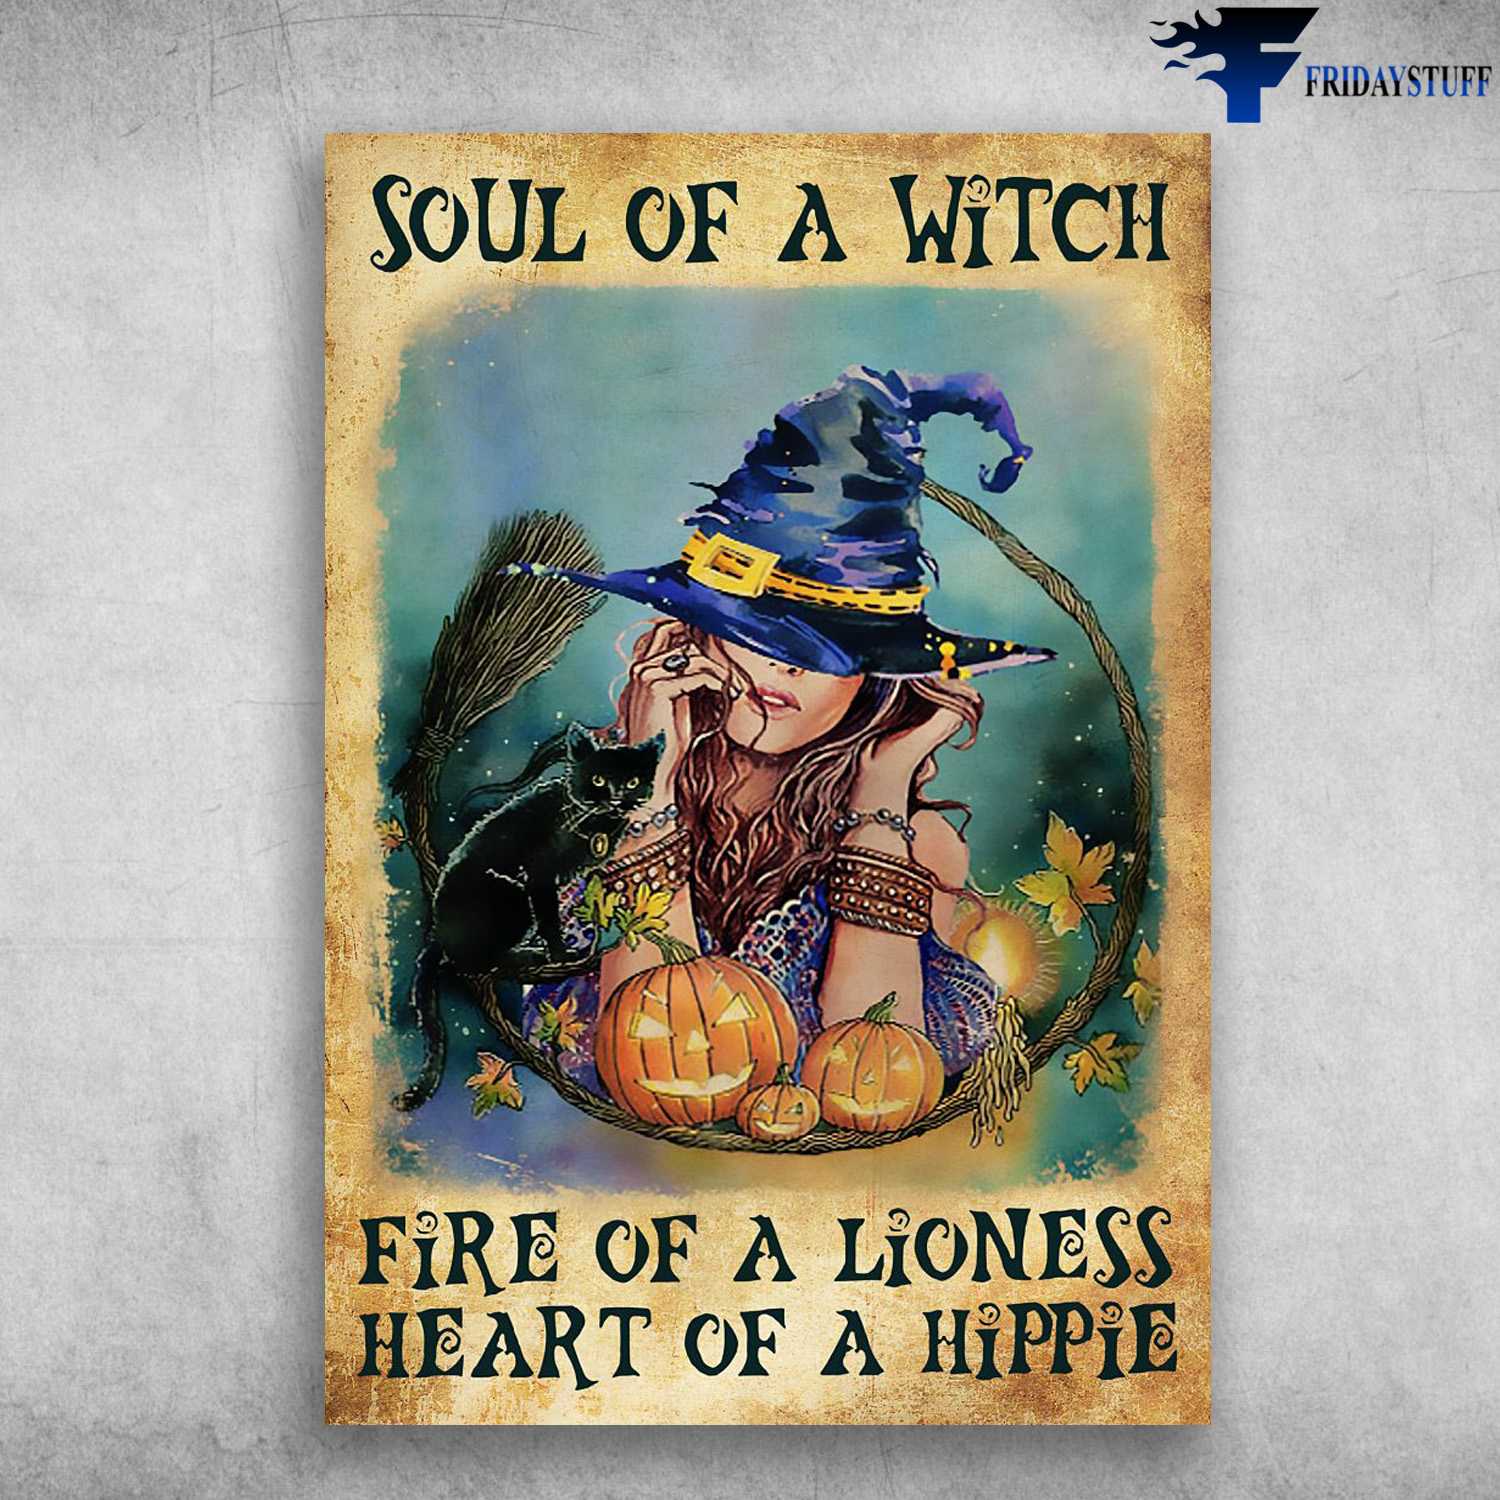 Black Cat, Witch Poster, Soul Of A Witch, Fire Of A Lioness, Heart Of A Hippie